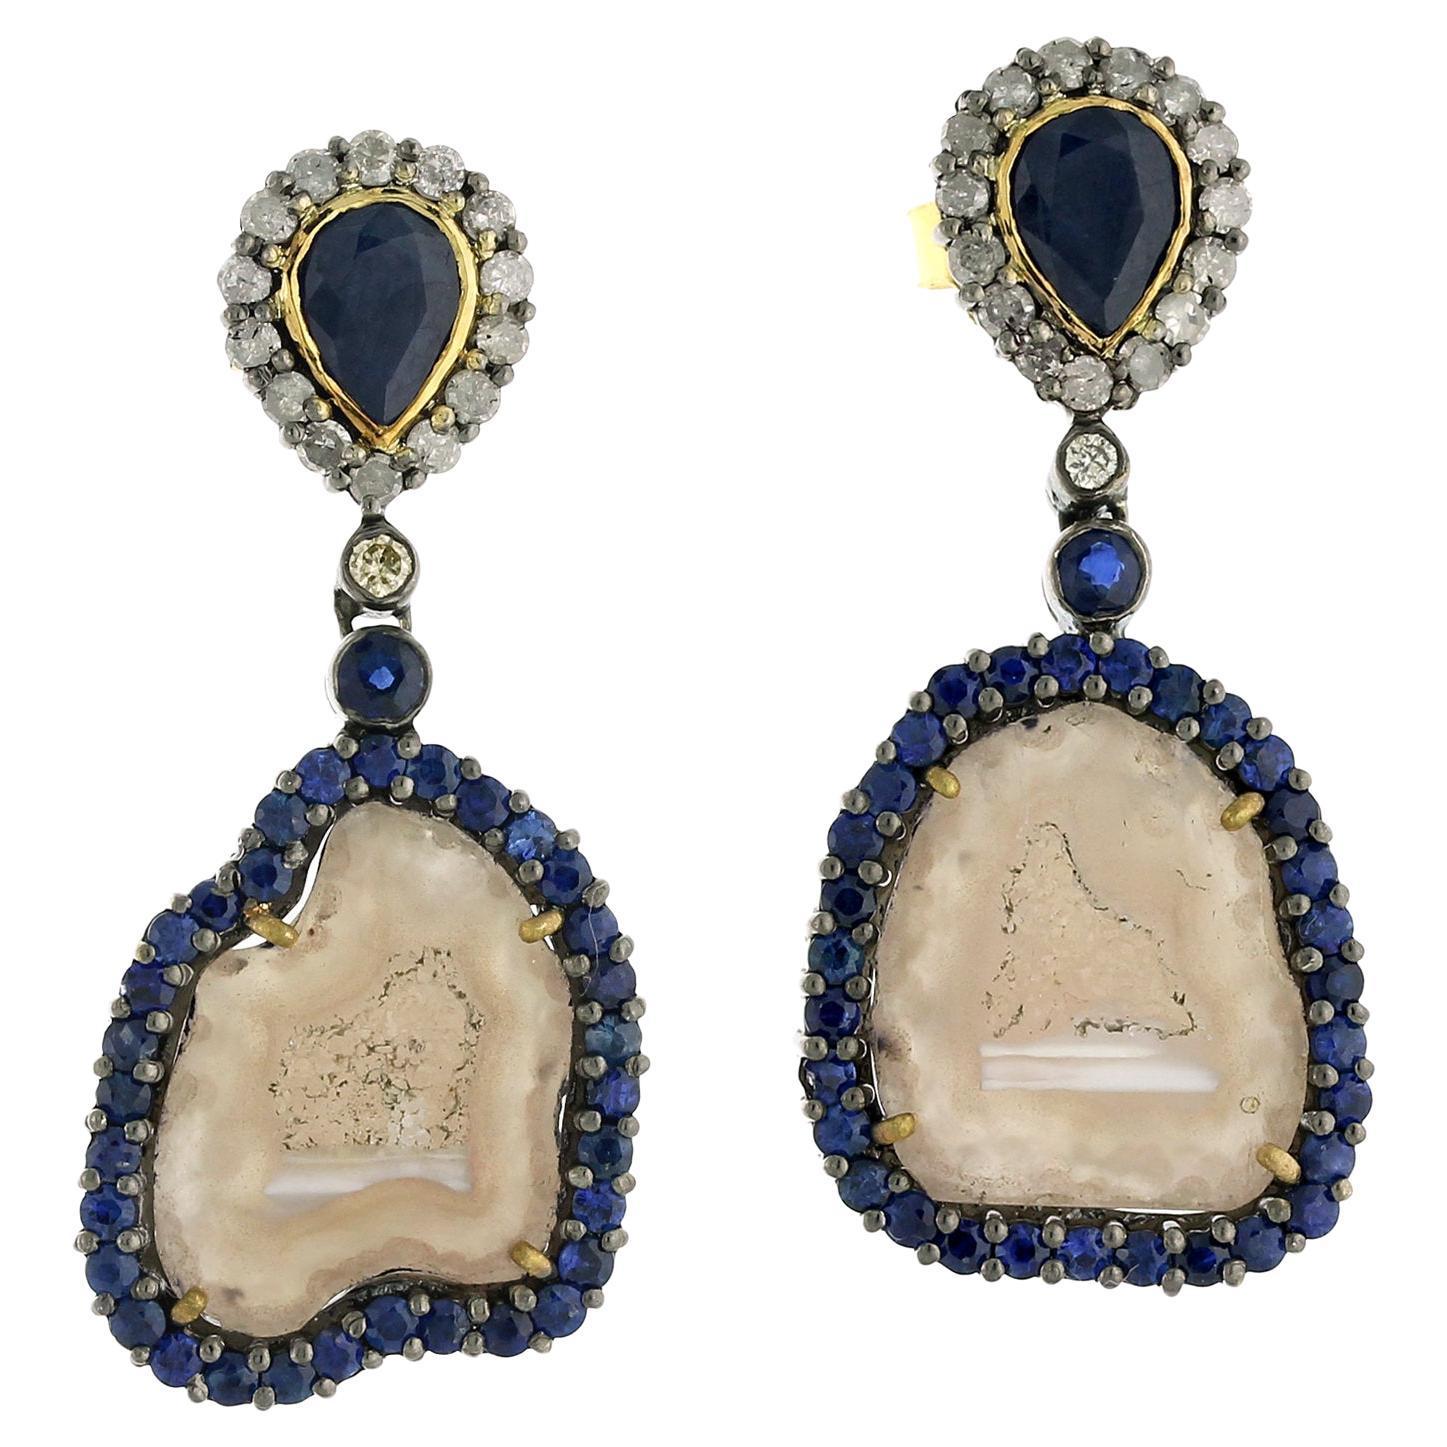 Sliced Geode Earring Surrounded by Pave Sapphire & Diamonds in 18k Gold & Silver